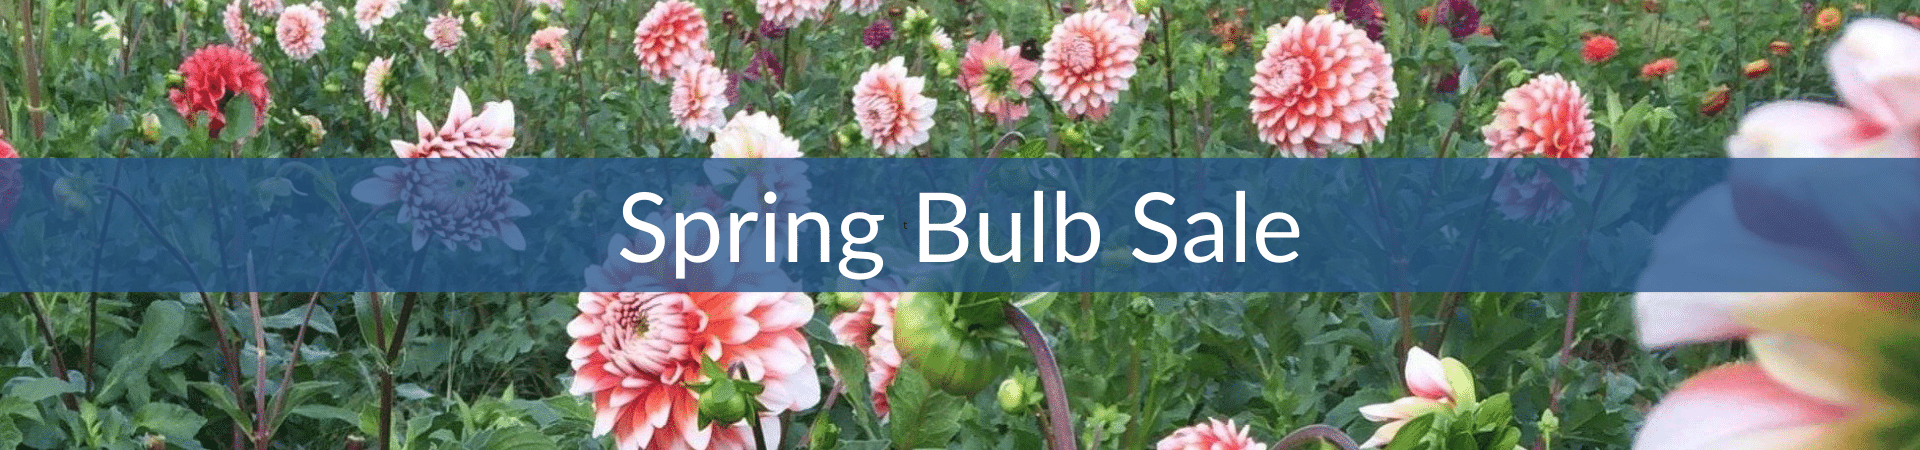 Spring Bulb Sale.png__PID:977aa538-4399-4a7c-9025-8bc333e082be